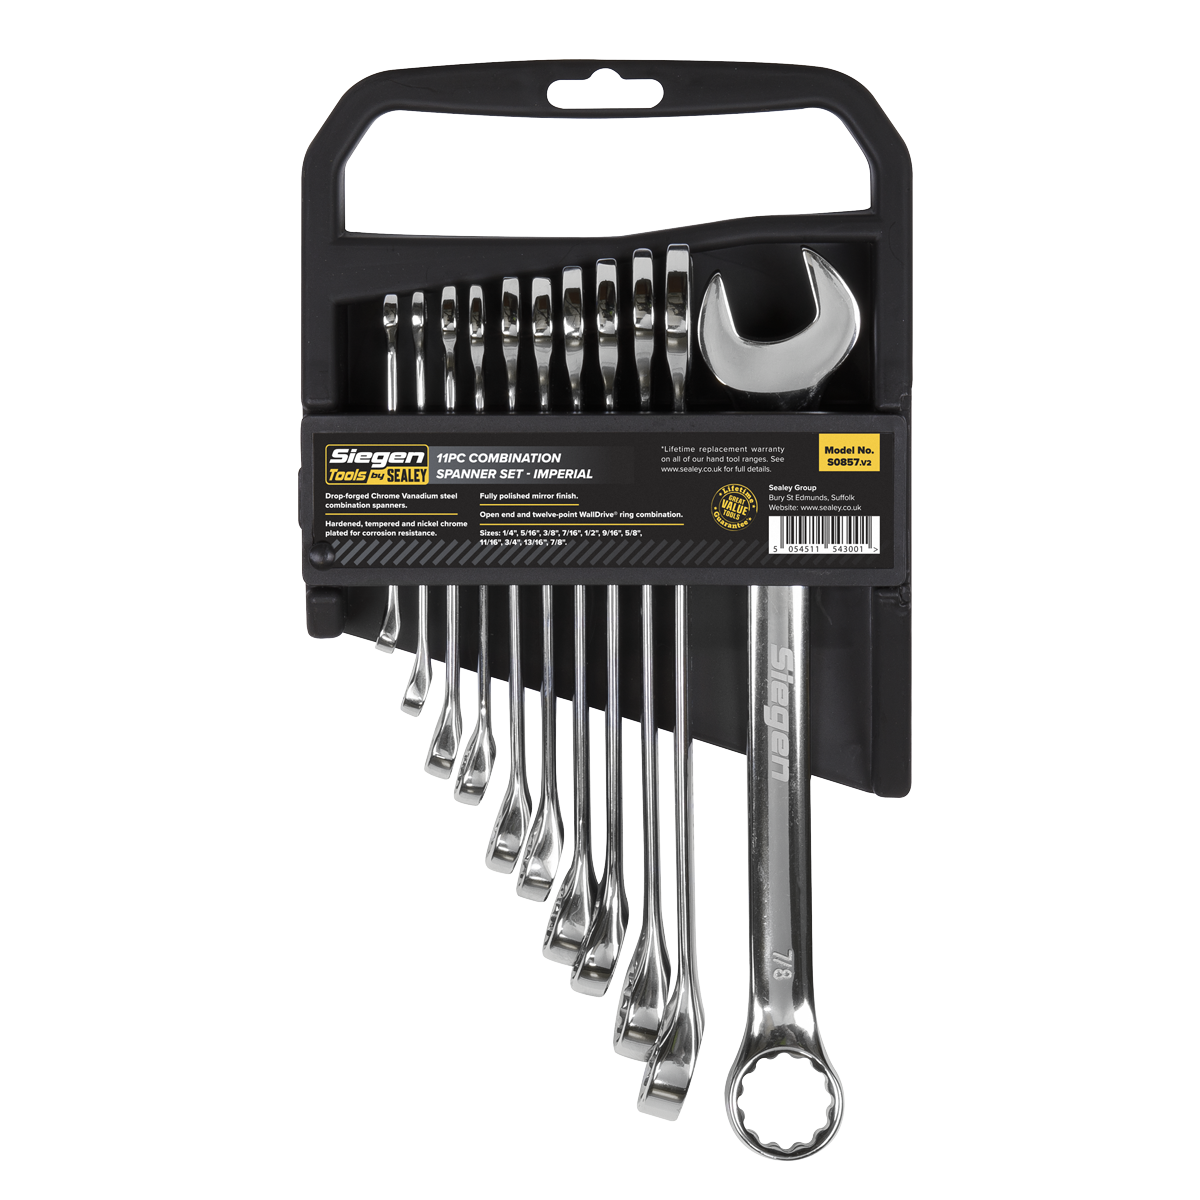 Sealey 11pc Combination Spanner Set - Imperial S0857 | toolforce.ie